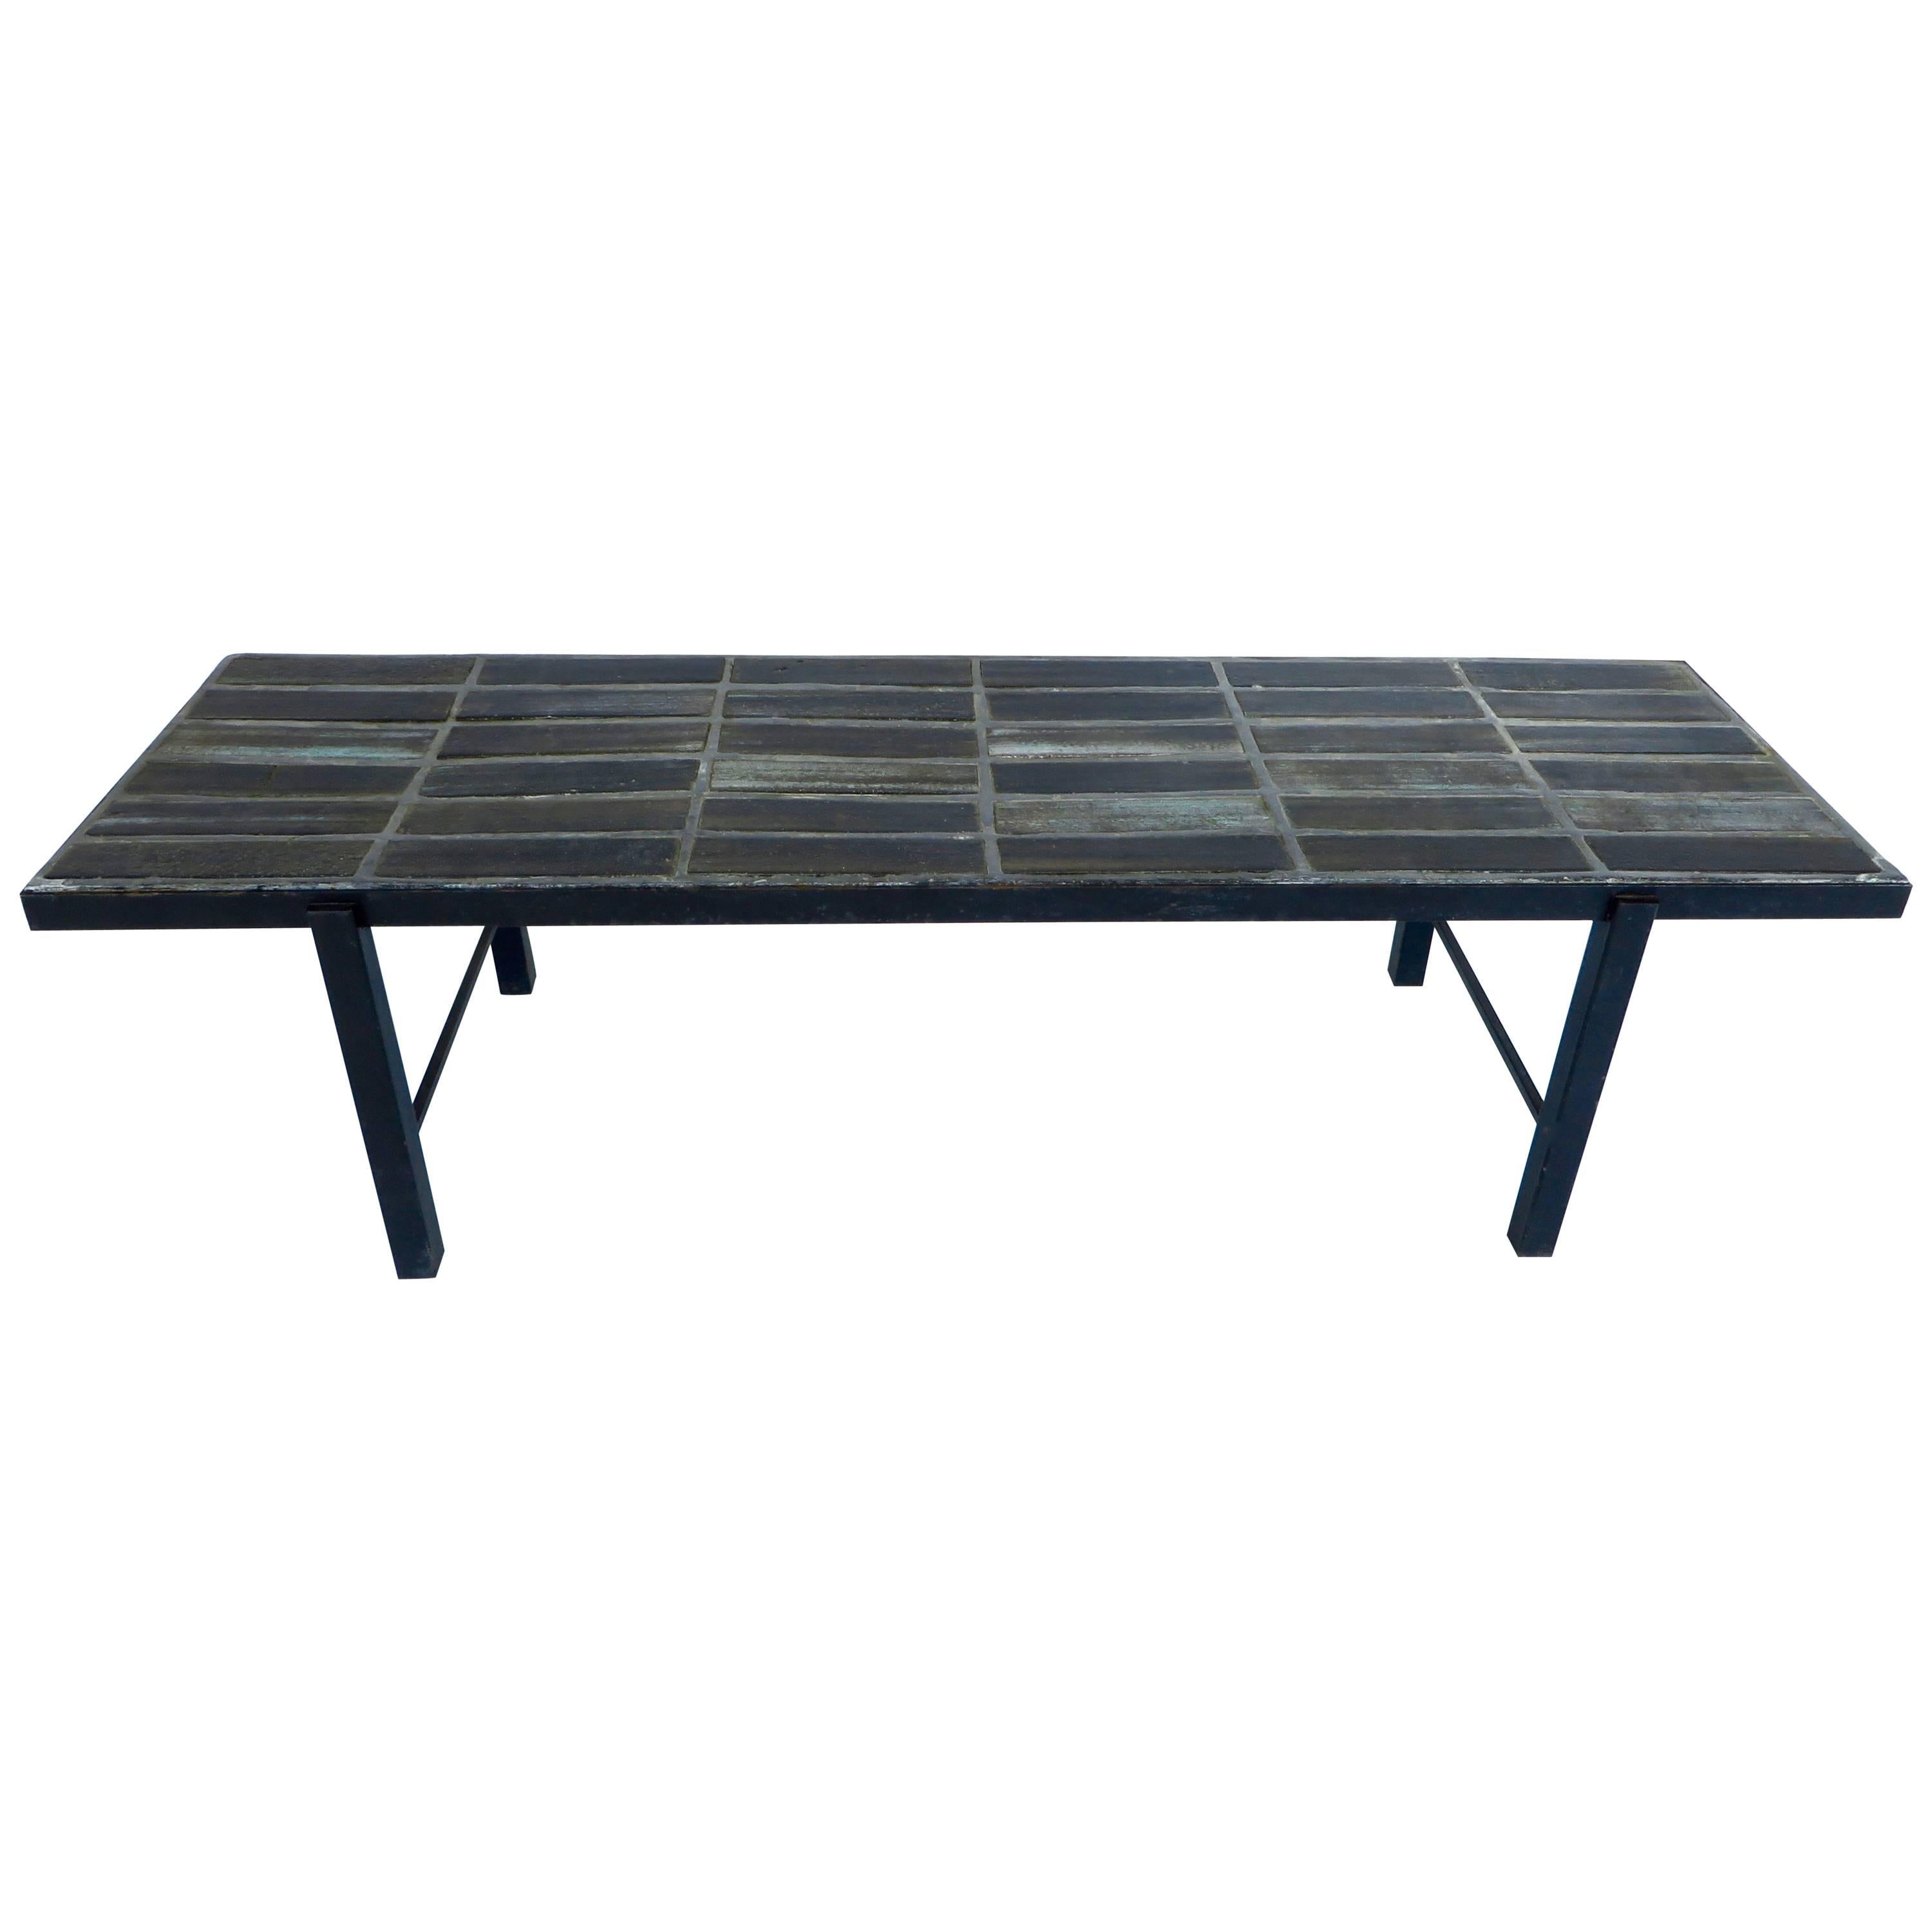 French Ceramic Tile Mosaic Blue Gray Coffee Table by Nicole Raude